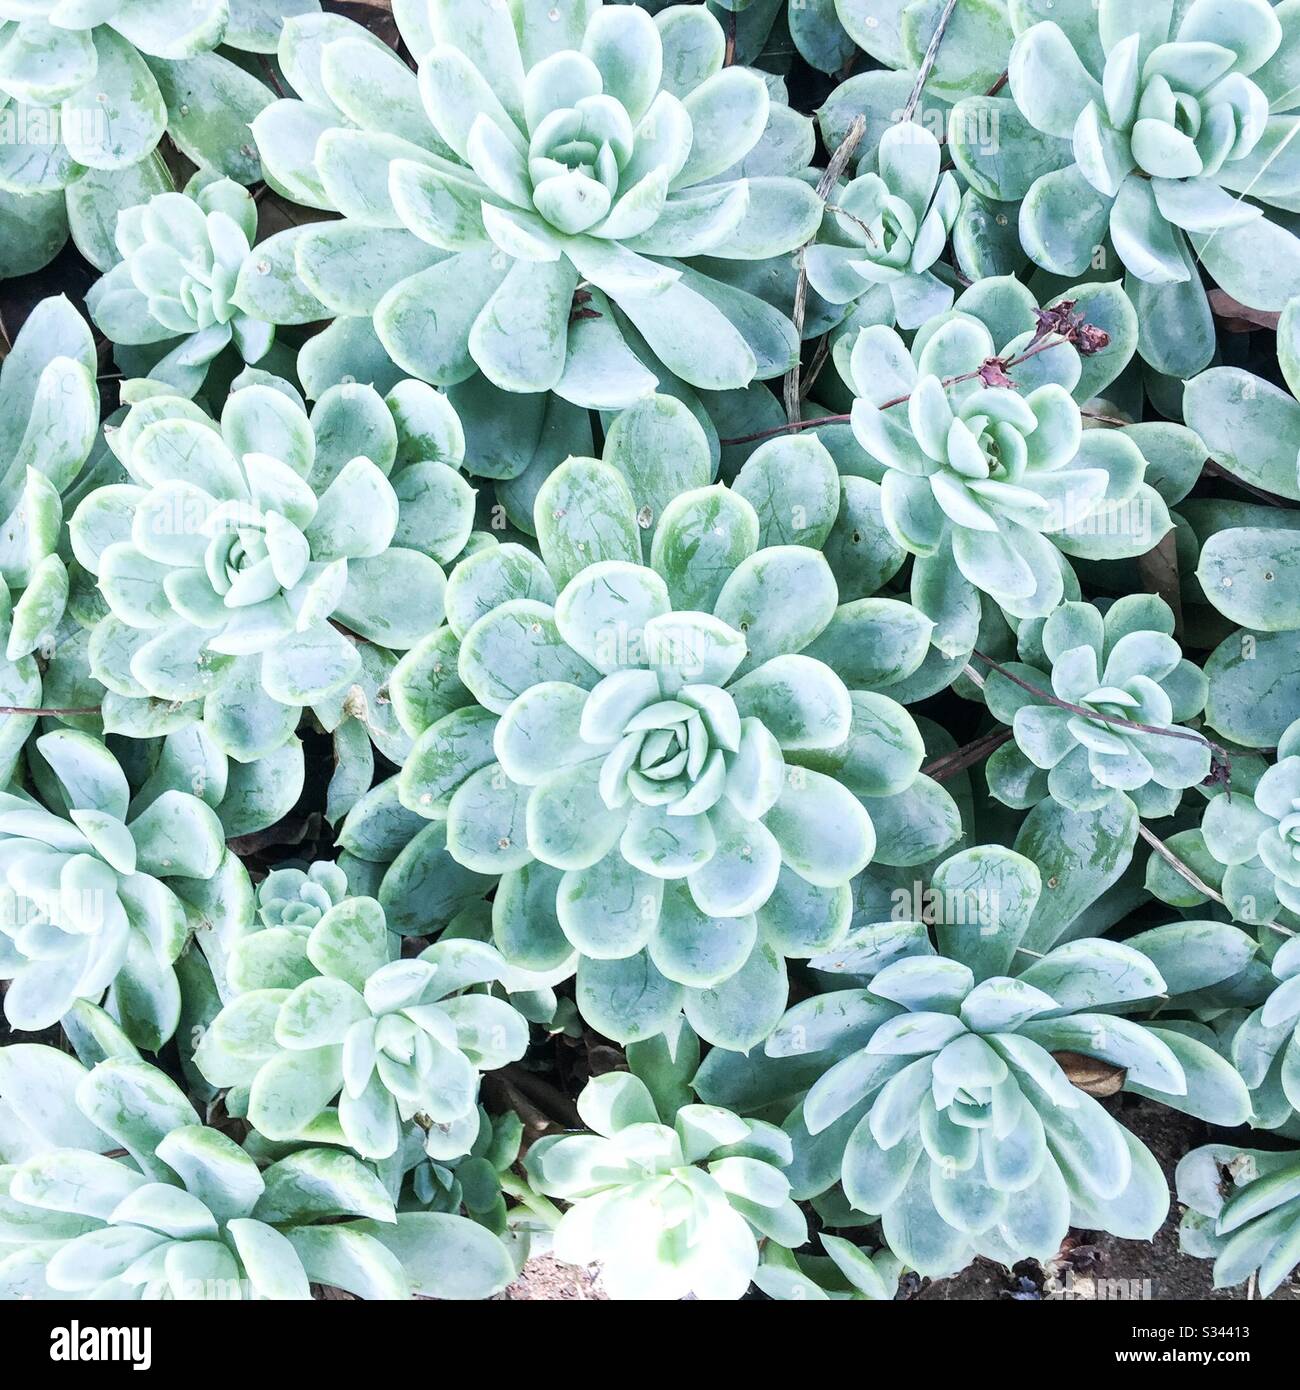 Succulents everywhere Stock Photo